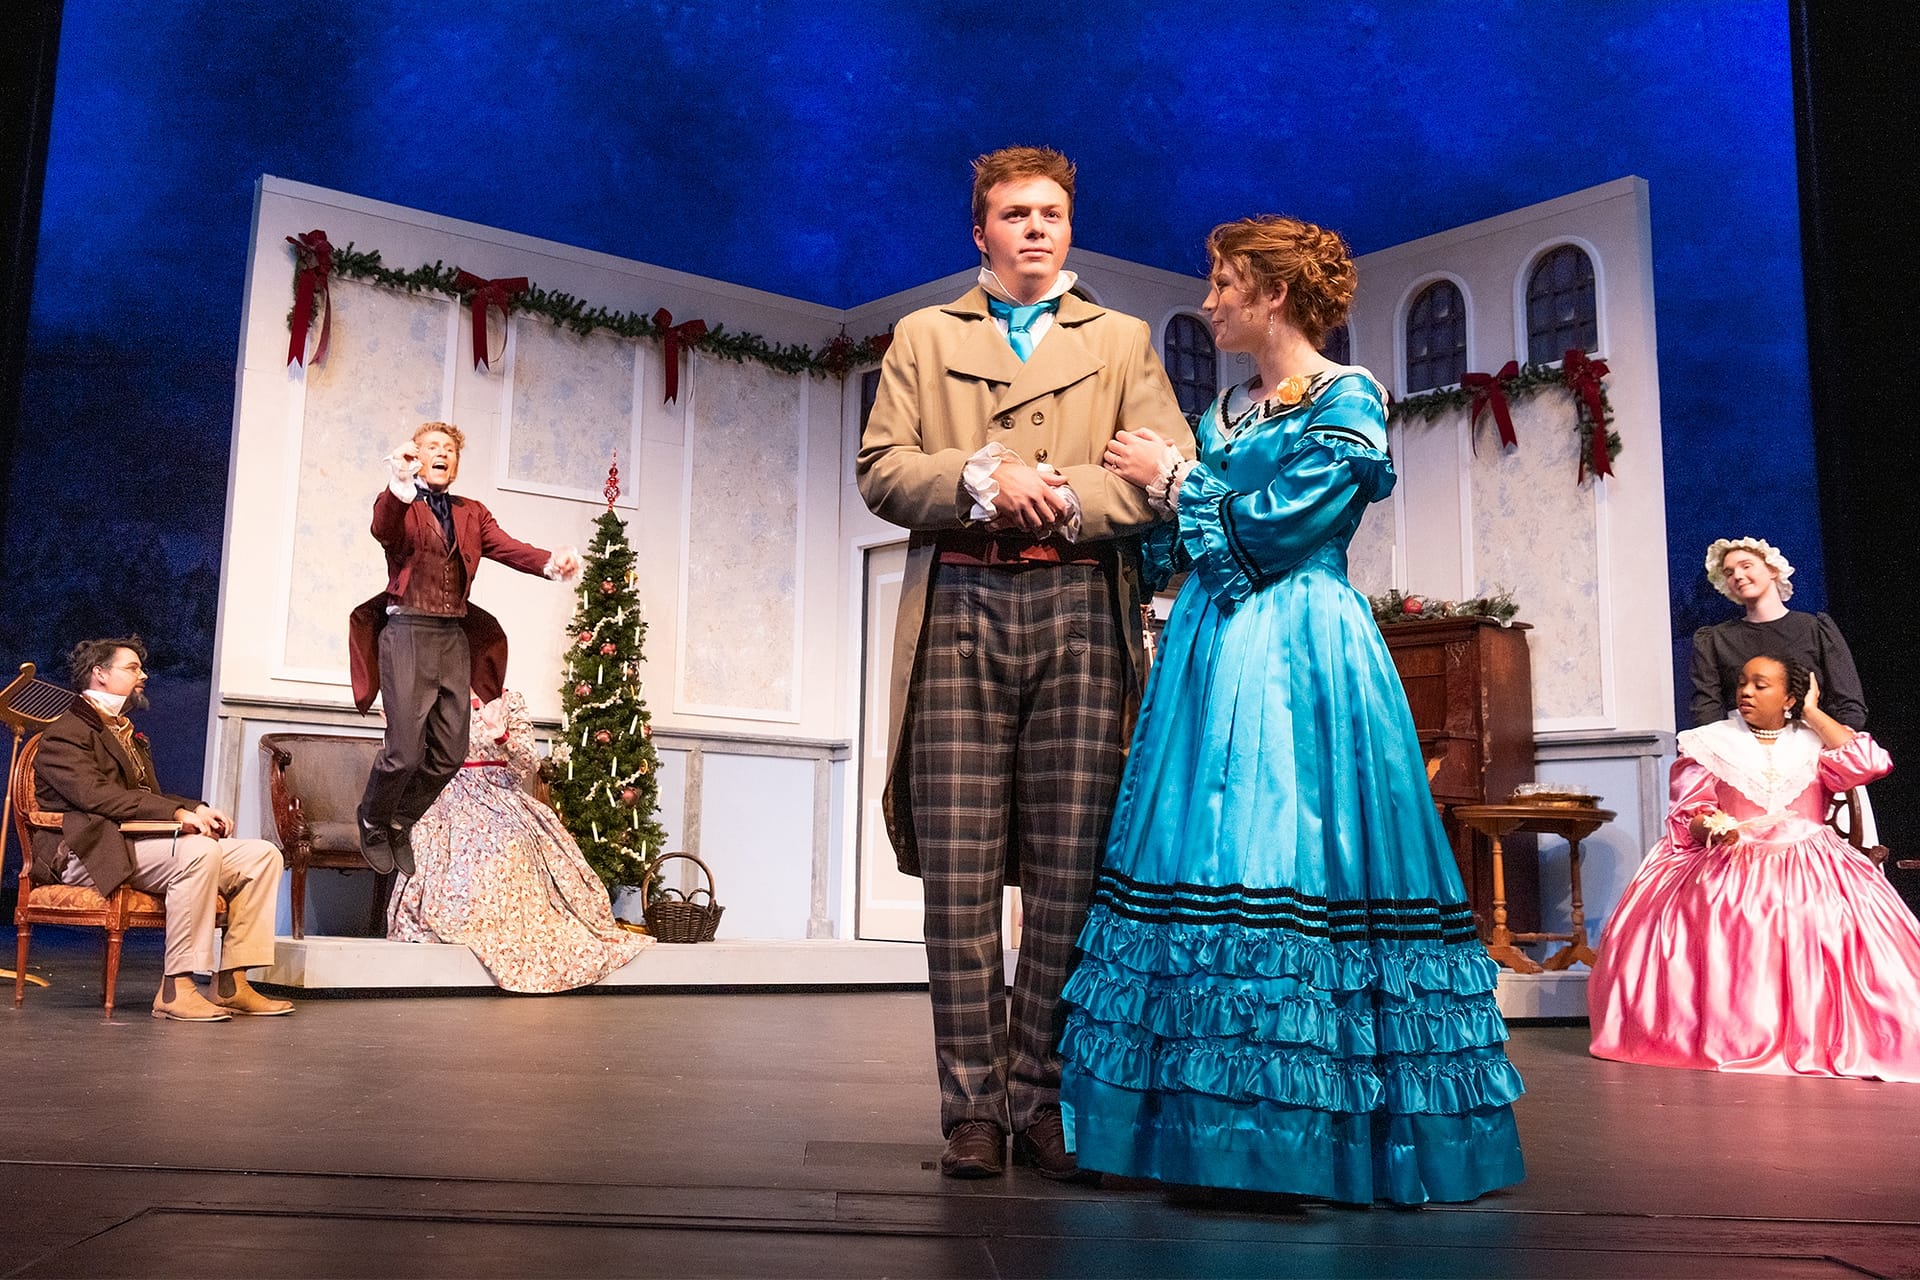 Actors in the Christmas Carol play presented by PCC.